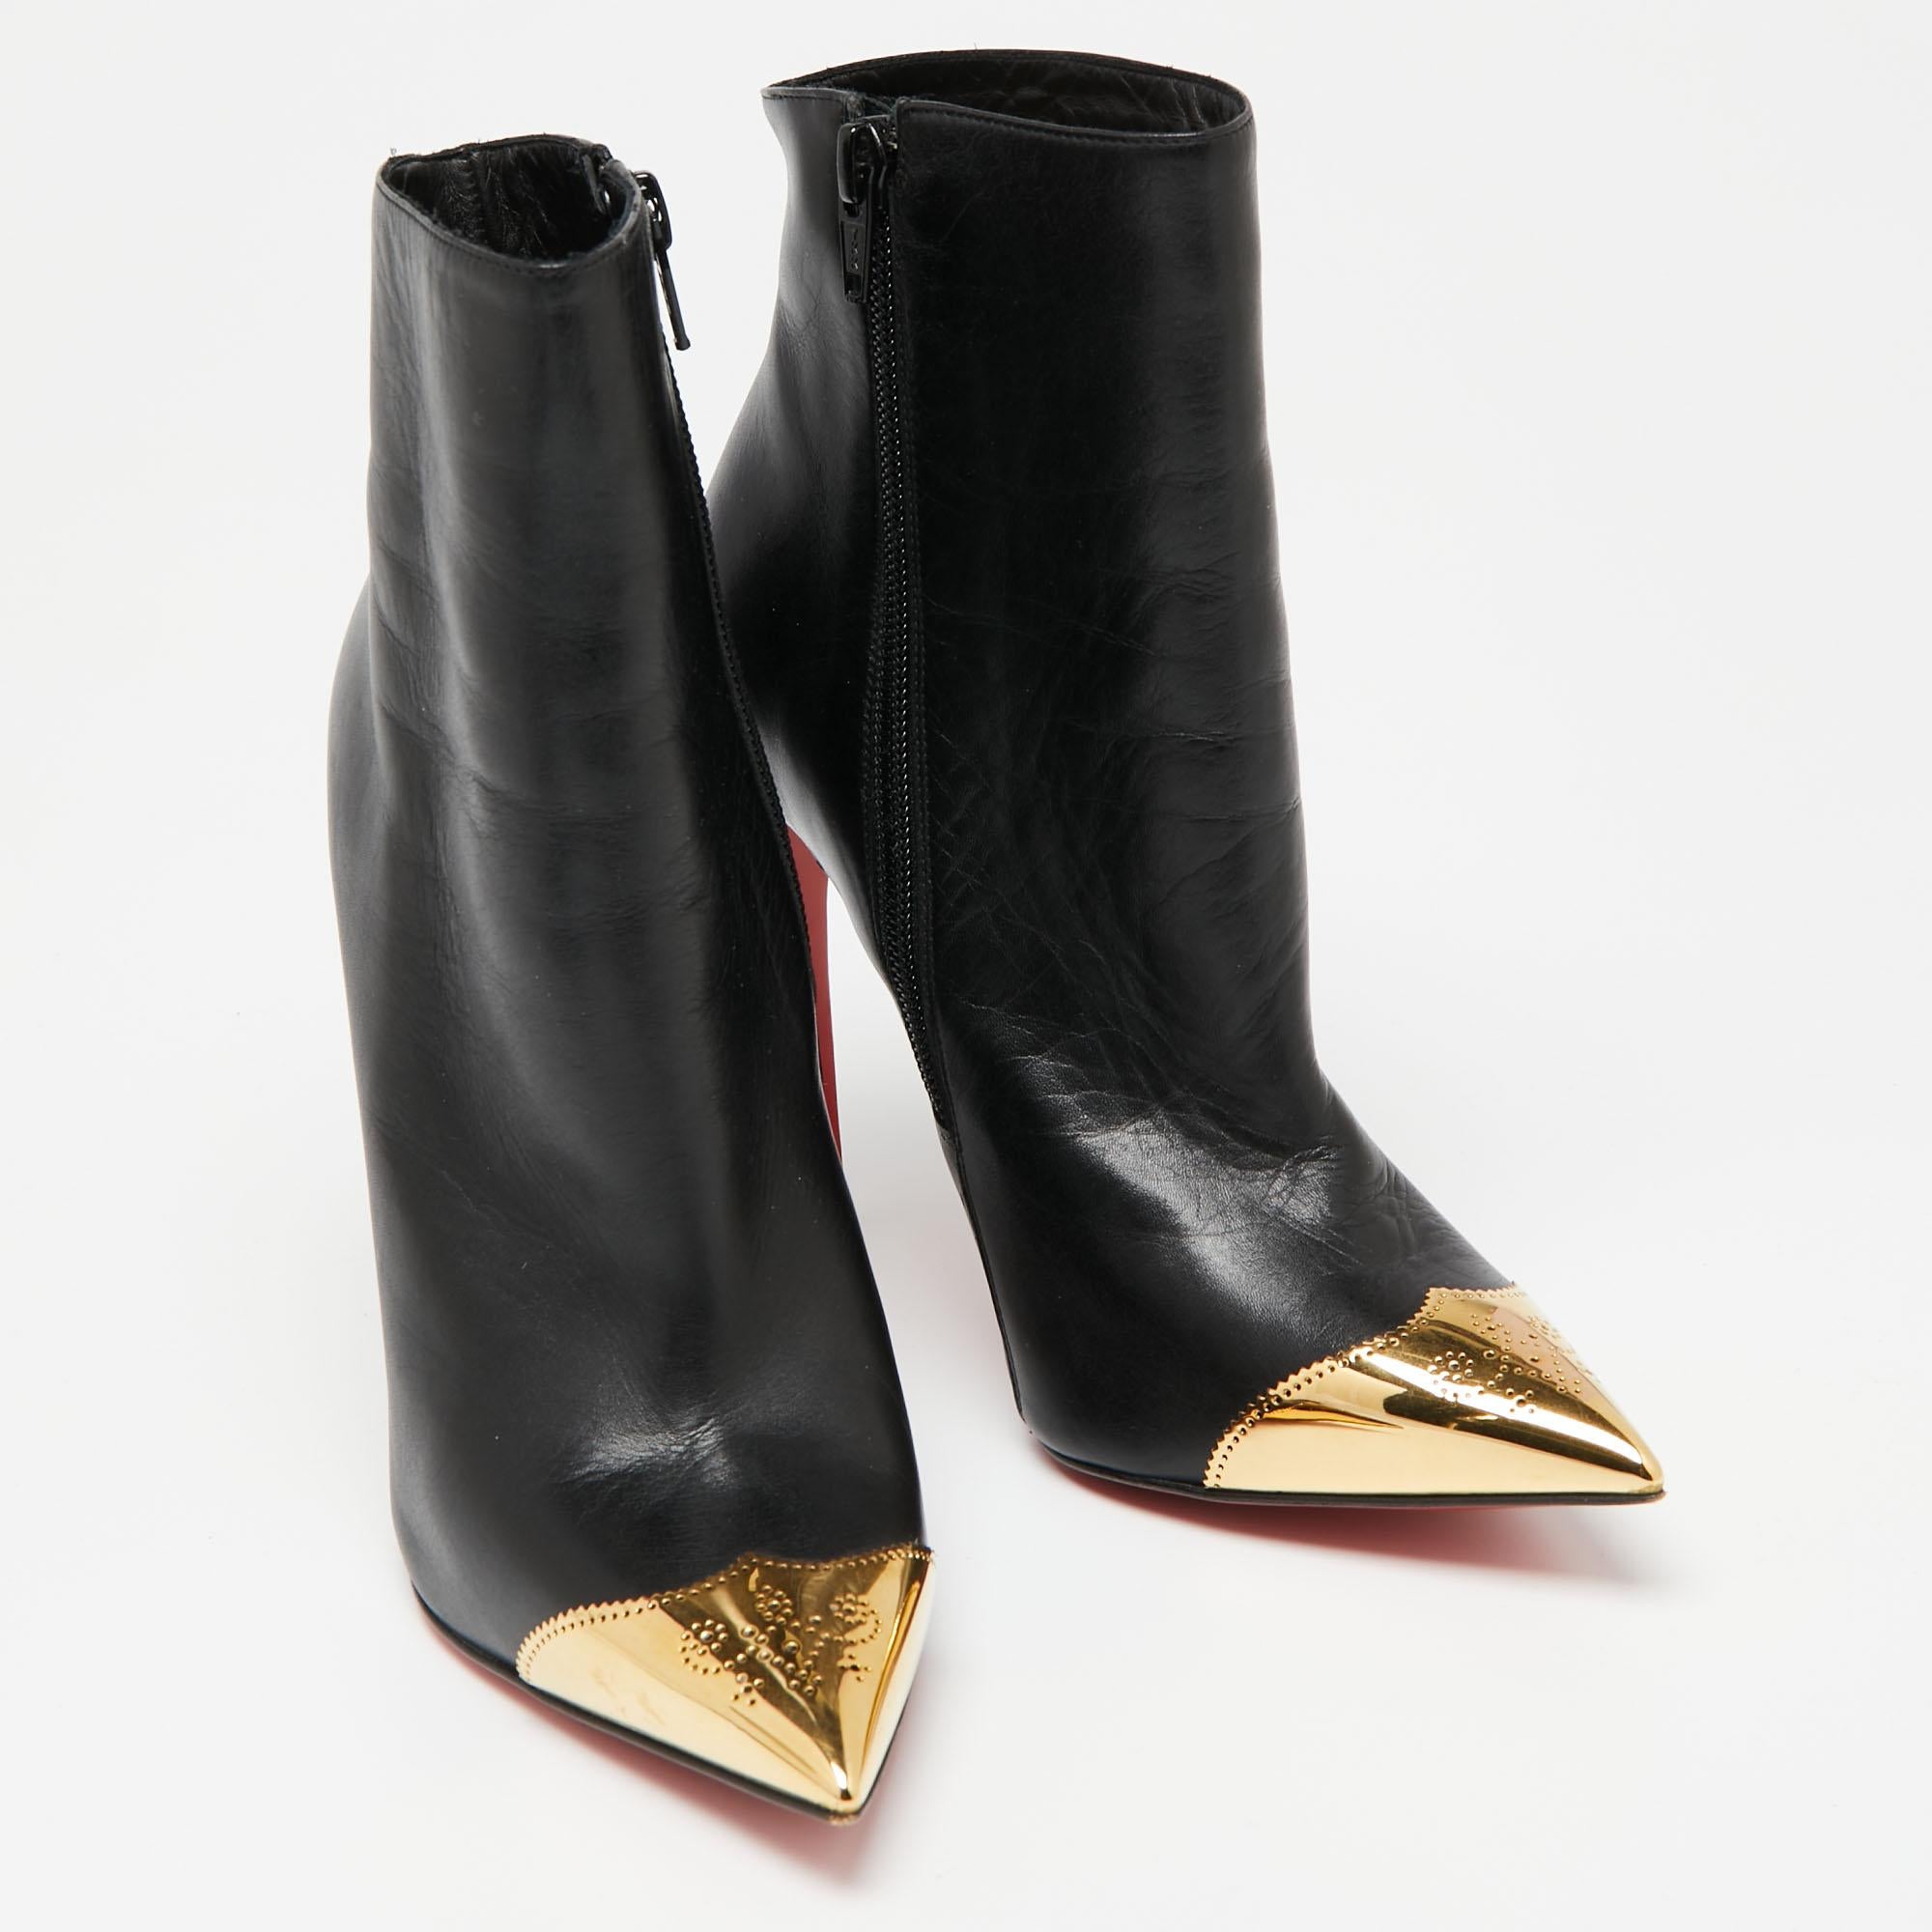 Christian Louboutin Black Leather Calamijane Pointed-Toe Ankle Booties Size 35.5 For Sale 1